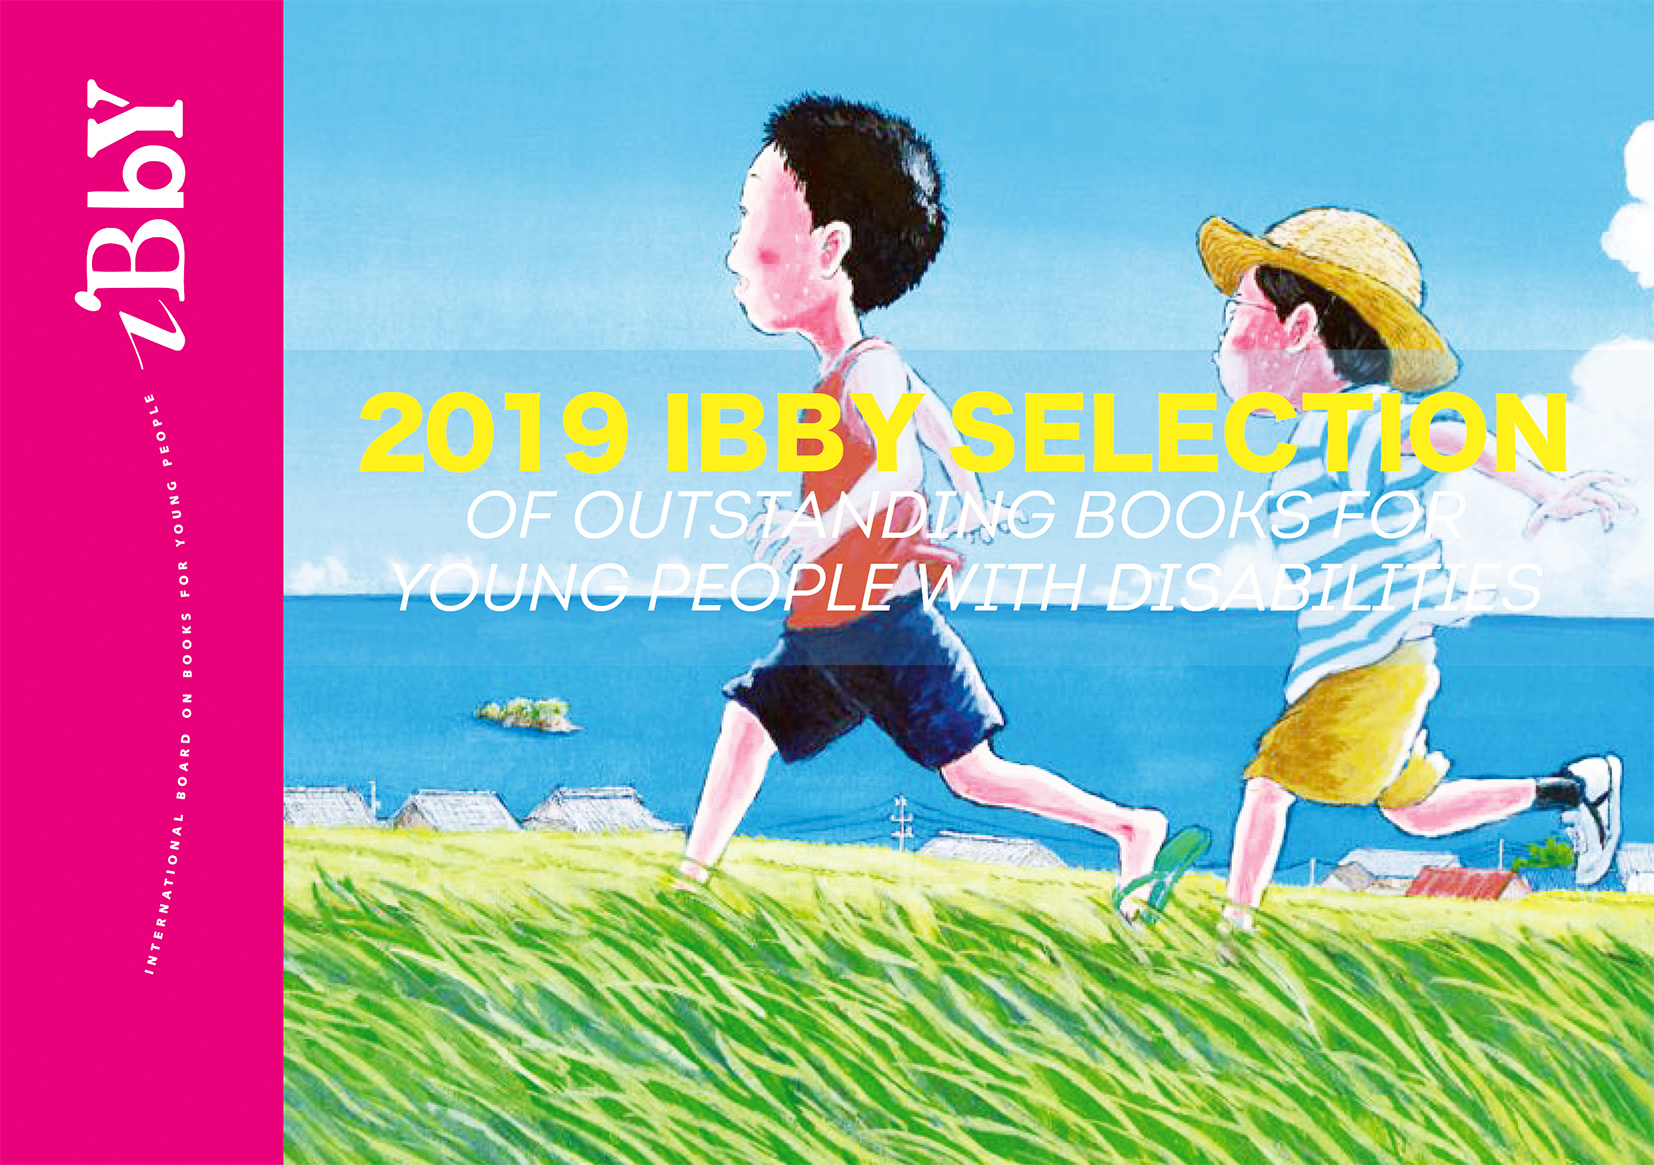 2019 IBBY selection of outstanding books for young people with disabilities